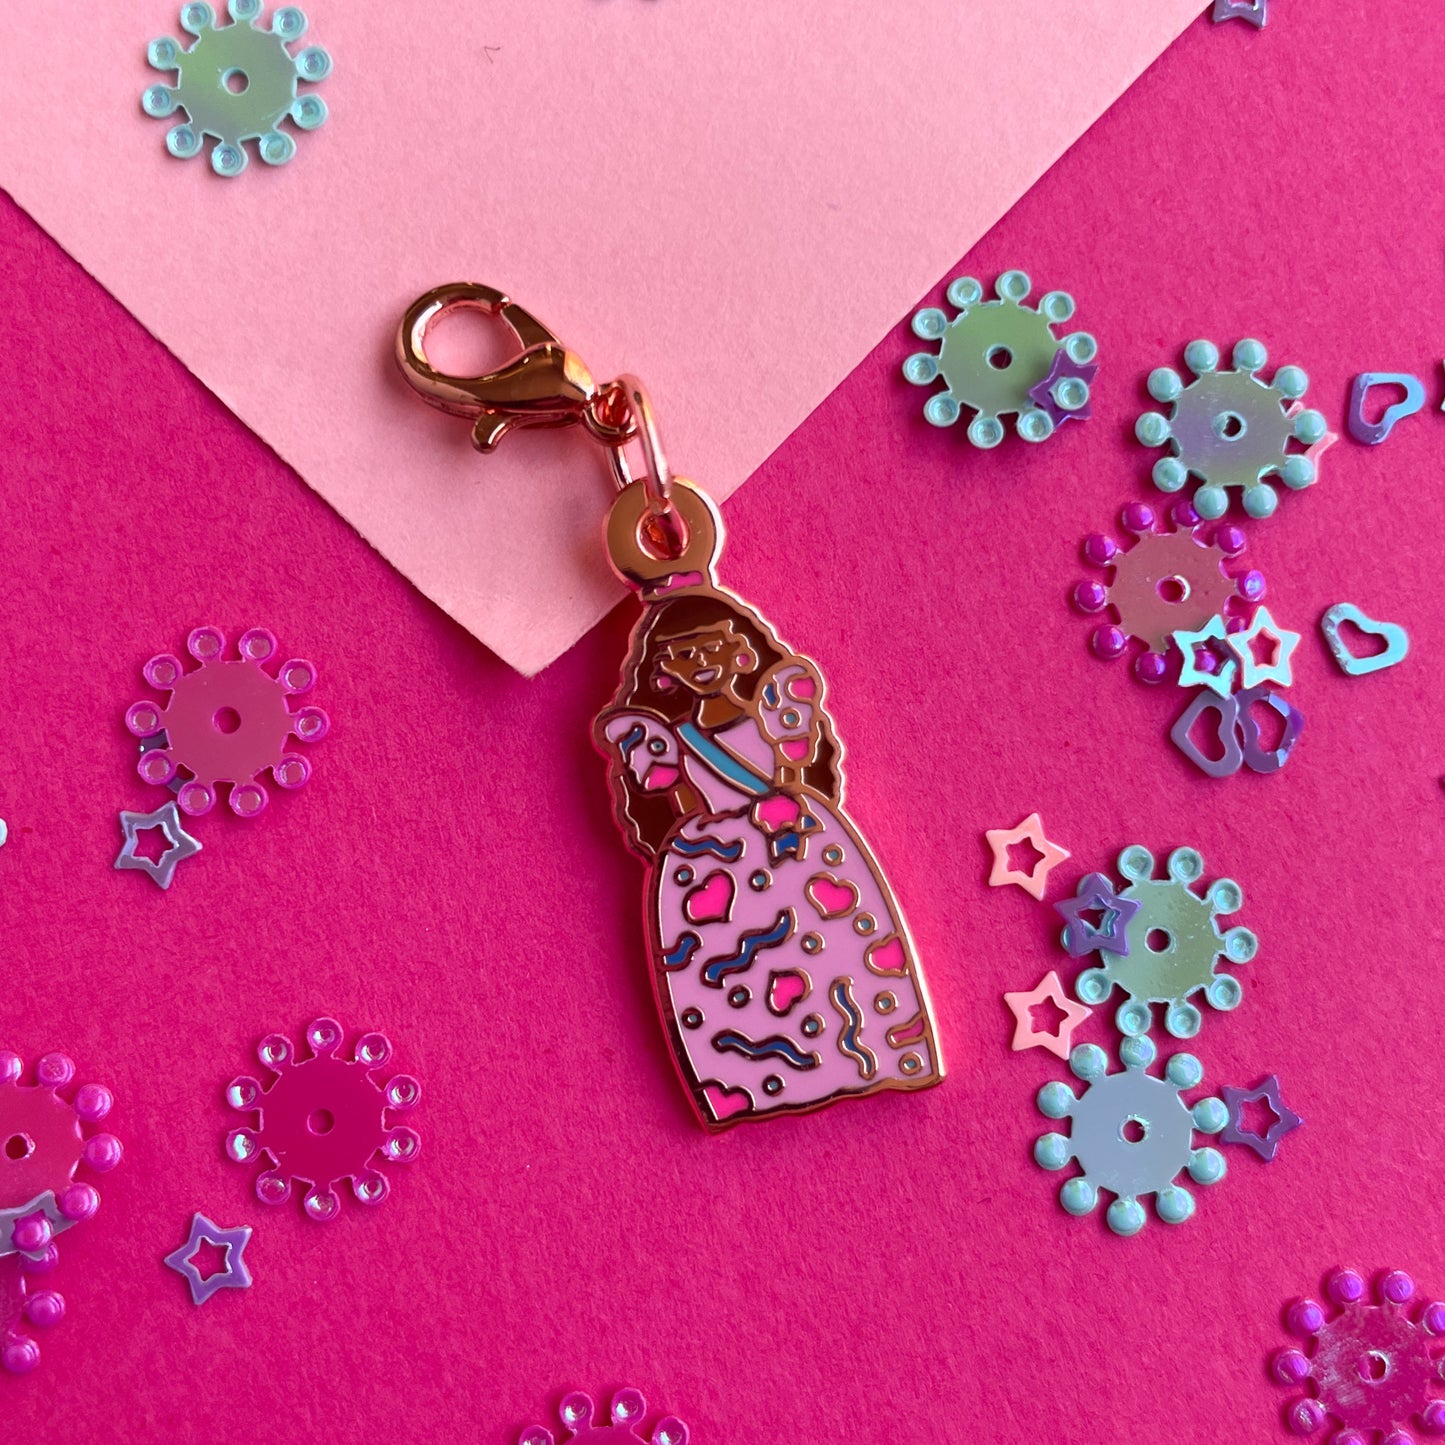 An enamel charm with a lobster claw clasp shaped like a birthday barbie doll with caramel skin and brown hair on a pink background.